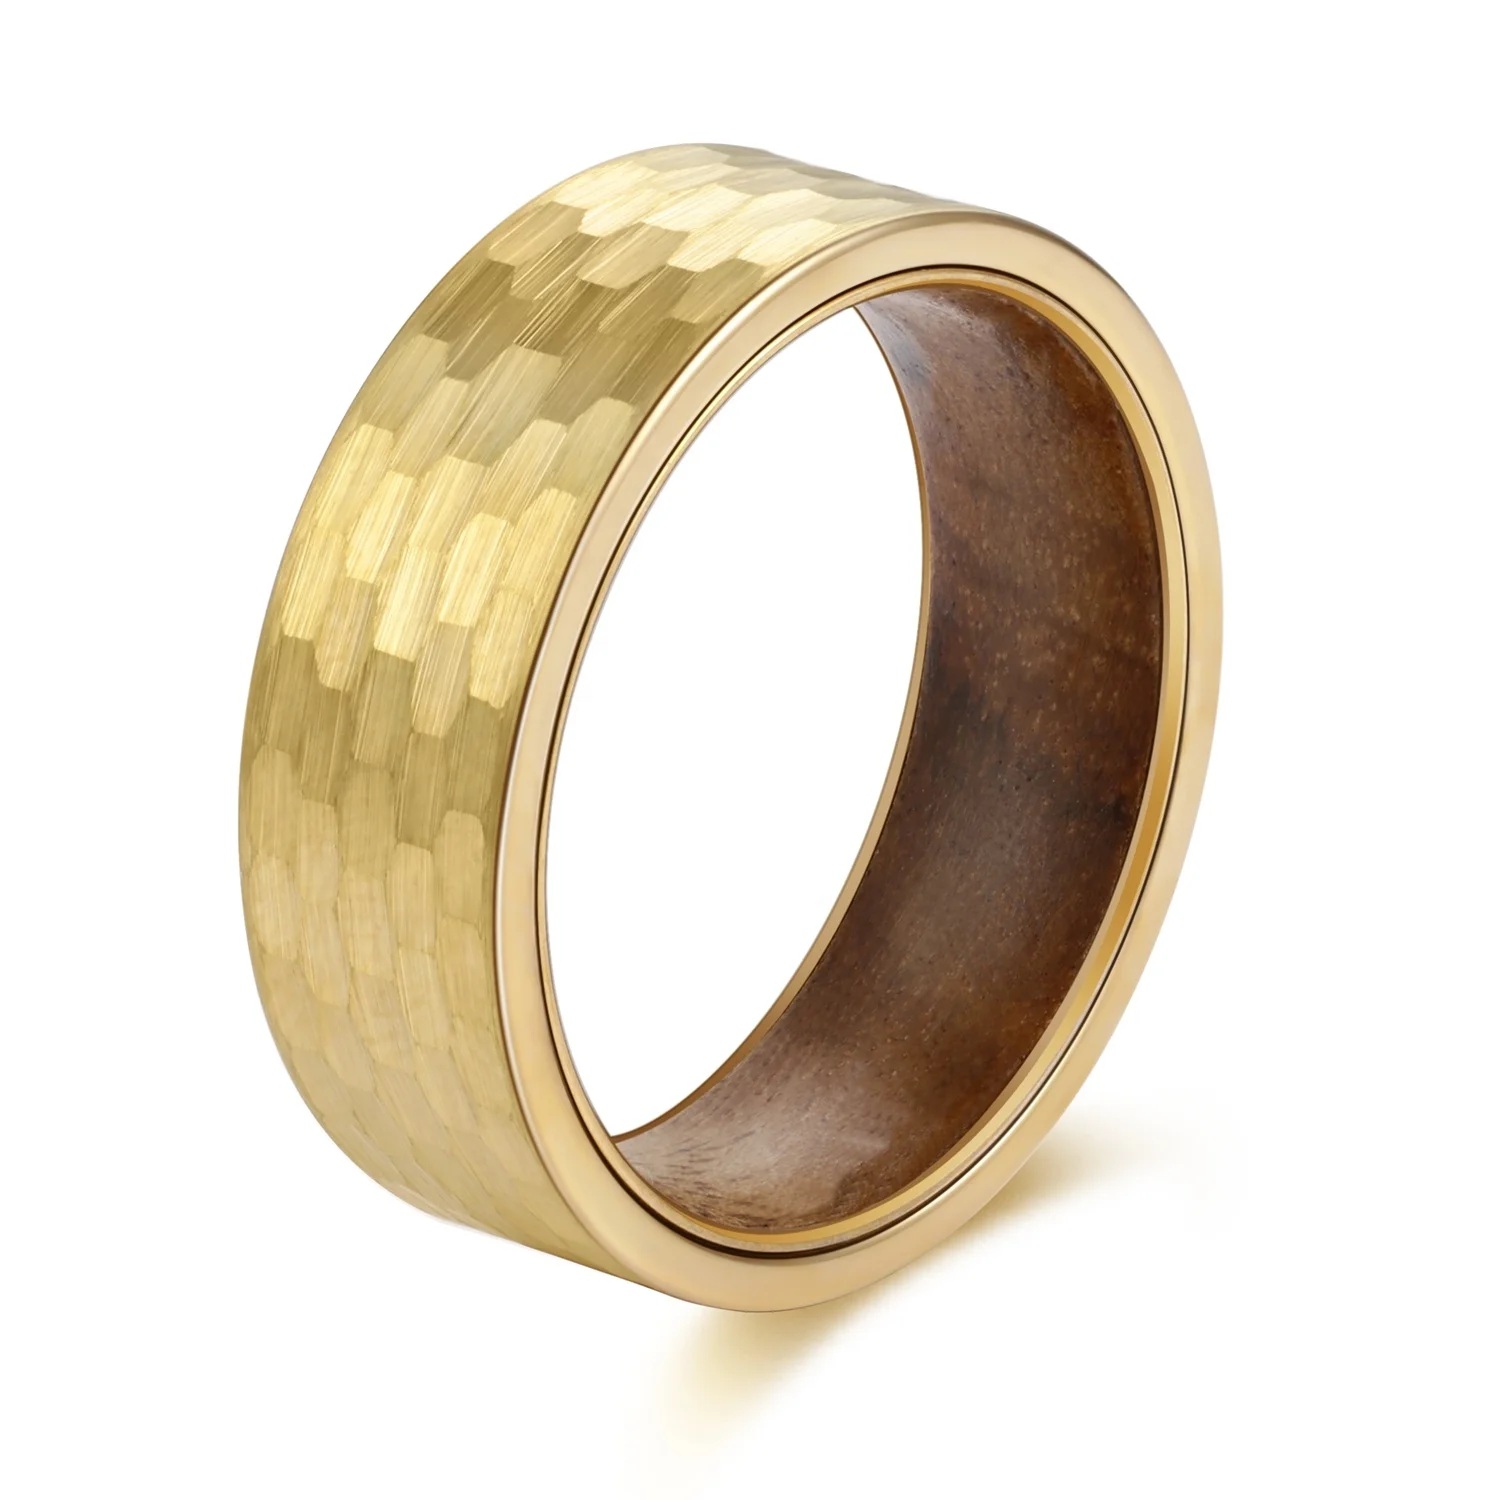 

POYA Hammered Tungsten Ring Men's 8mm Gold Plated Wedding Engagement Band Koa Wood Inside Comfort Fit, Customized color